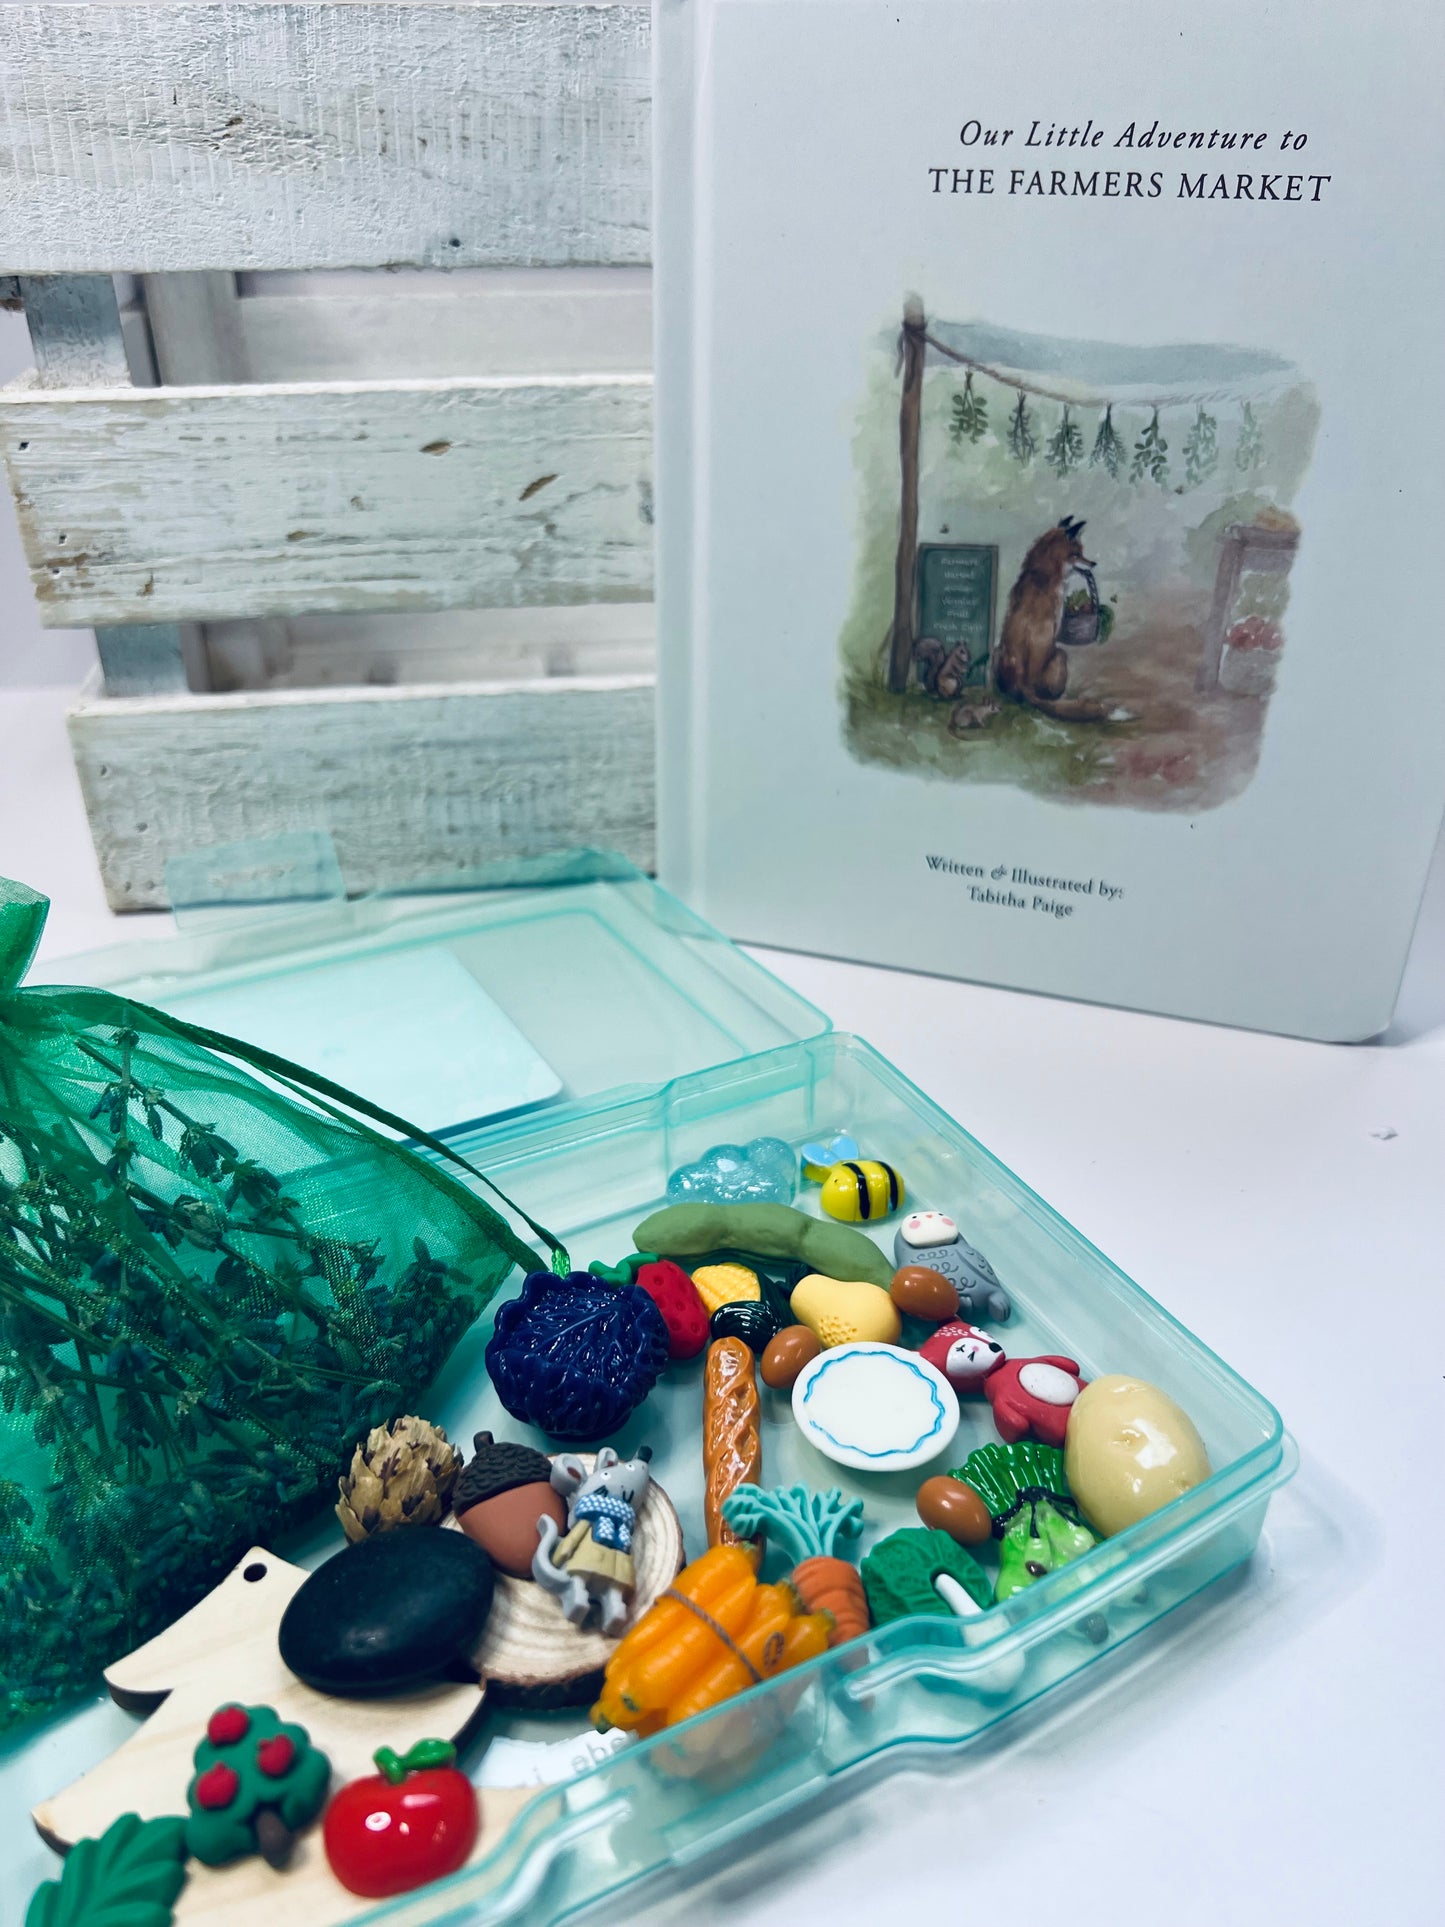 Farmers Market Book and Story Kit Mini Objects for Speech Therapy Tabitha Paige SLP Book